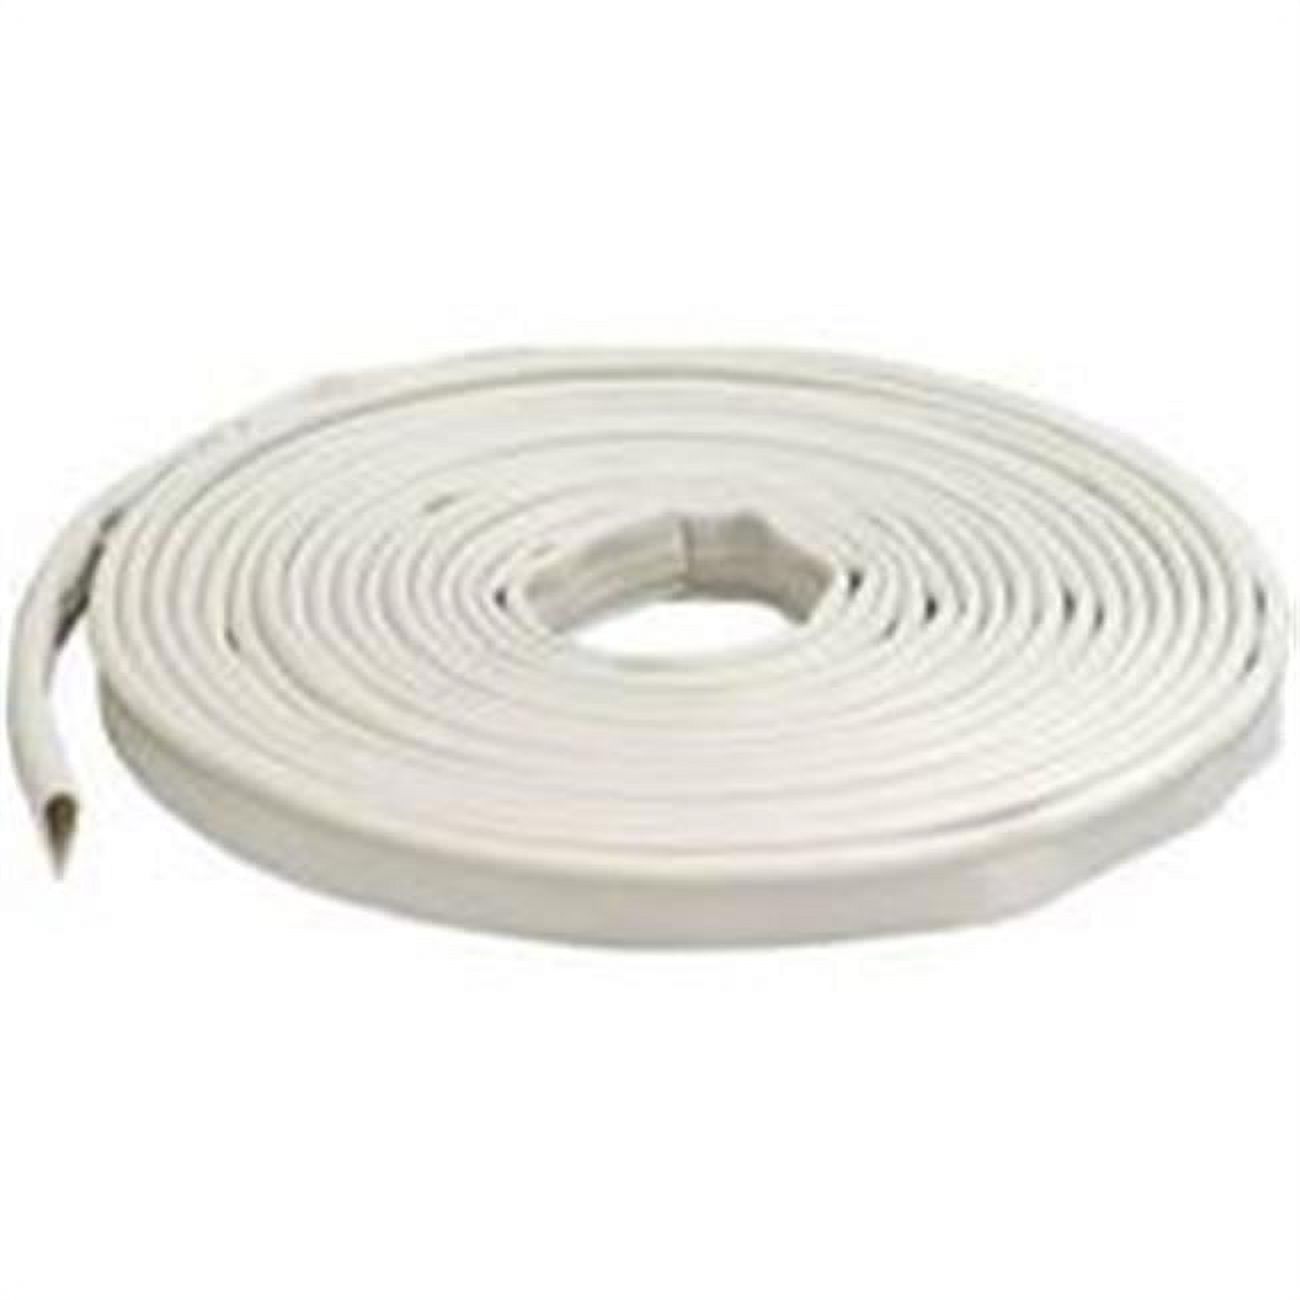 M-D Building Products 68676 WS108 1/4-Inch by 1/2-Inch 20-Feet Silicone Smoke Seal Casketing - image 1 of 2